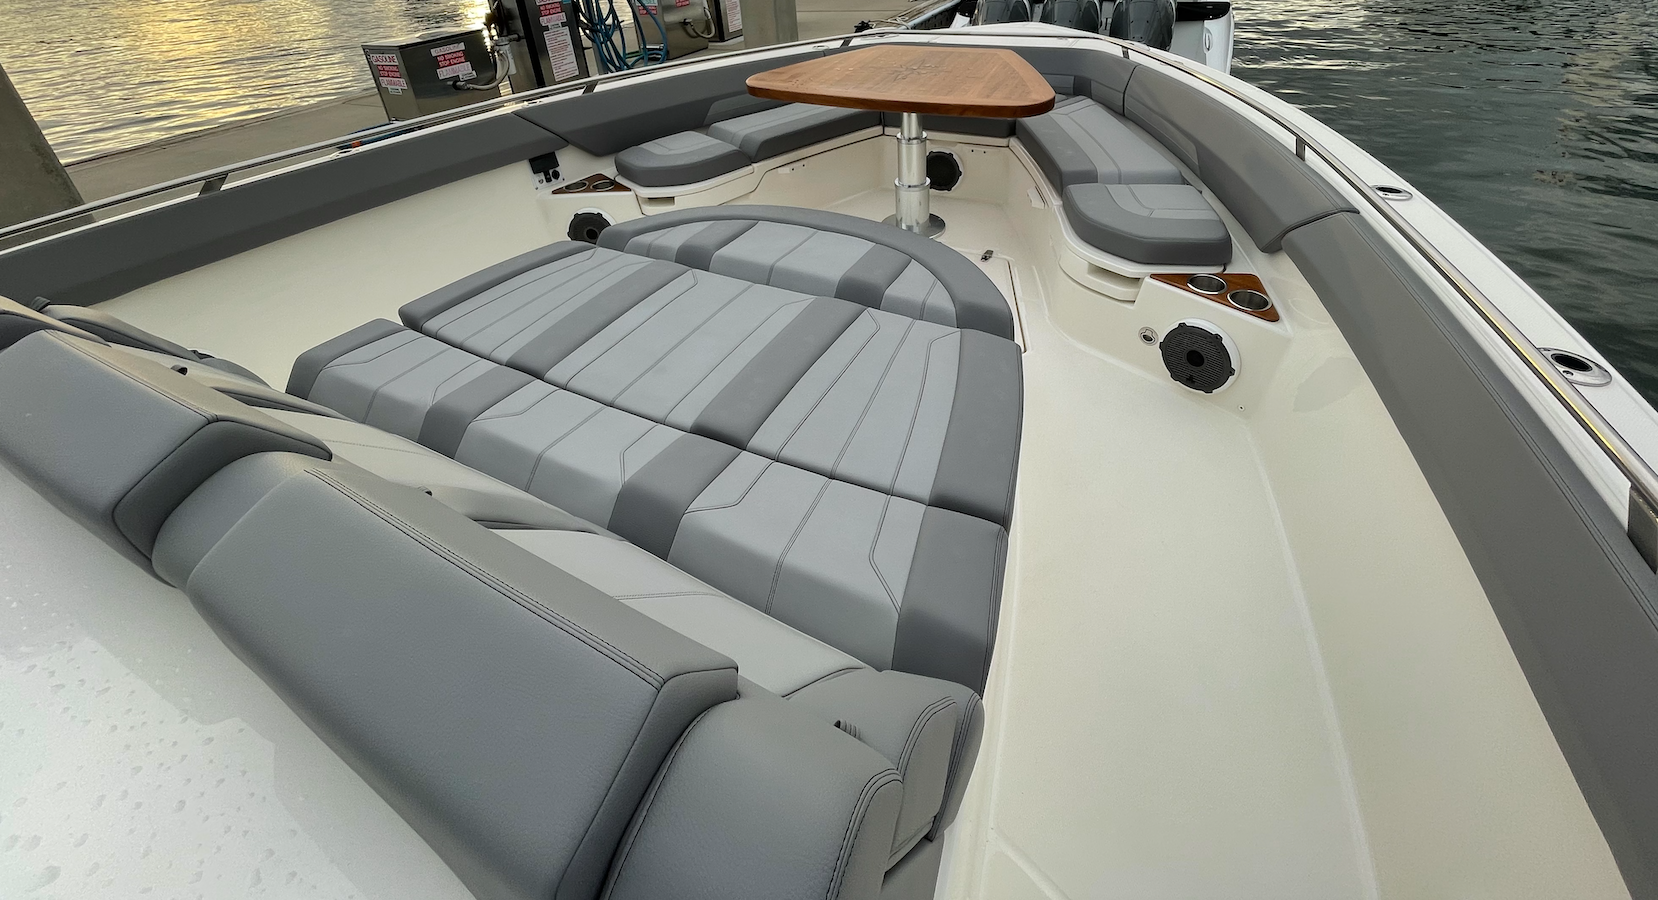 420 Outrage anniversary edition upholstery, bow seats